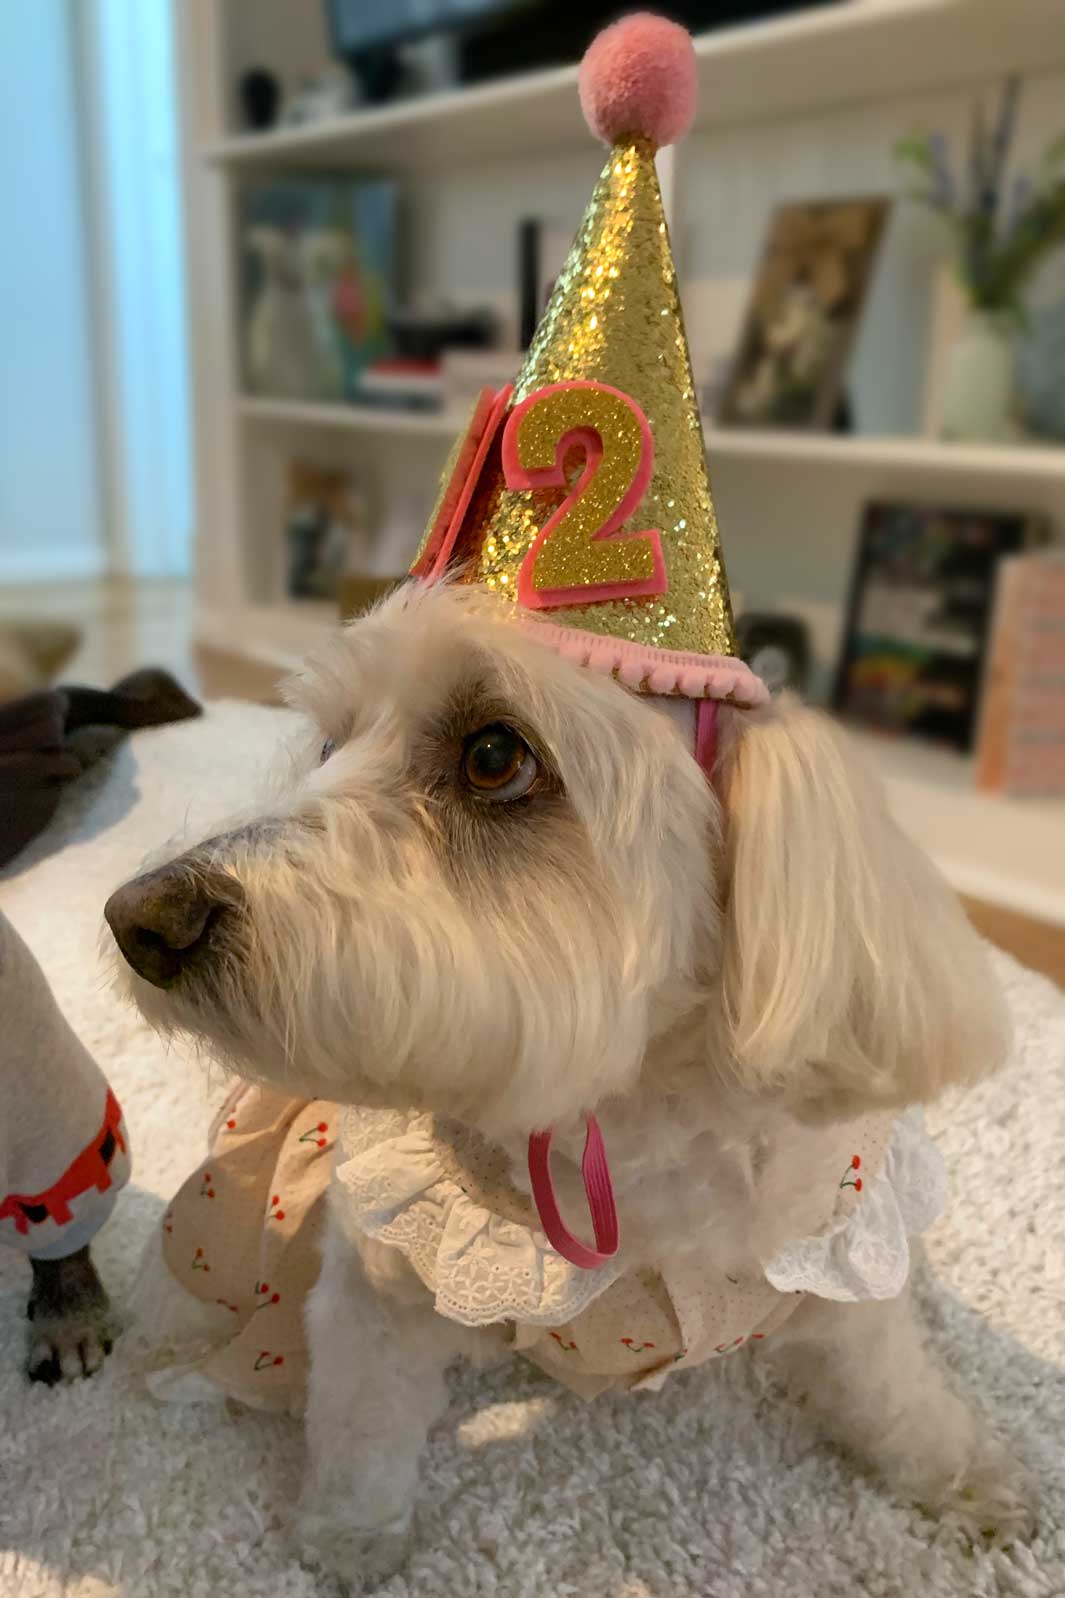 Willow, Bichon Frise, Maltese and Havanese mix, wearing a happy birthday hat celebrates her b-day with birthday cake from The Dog Bakery in Pasadena, California.